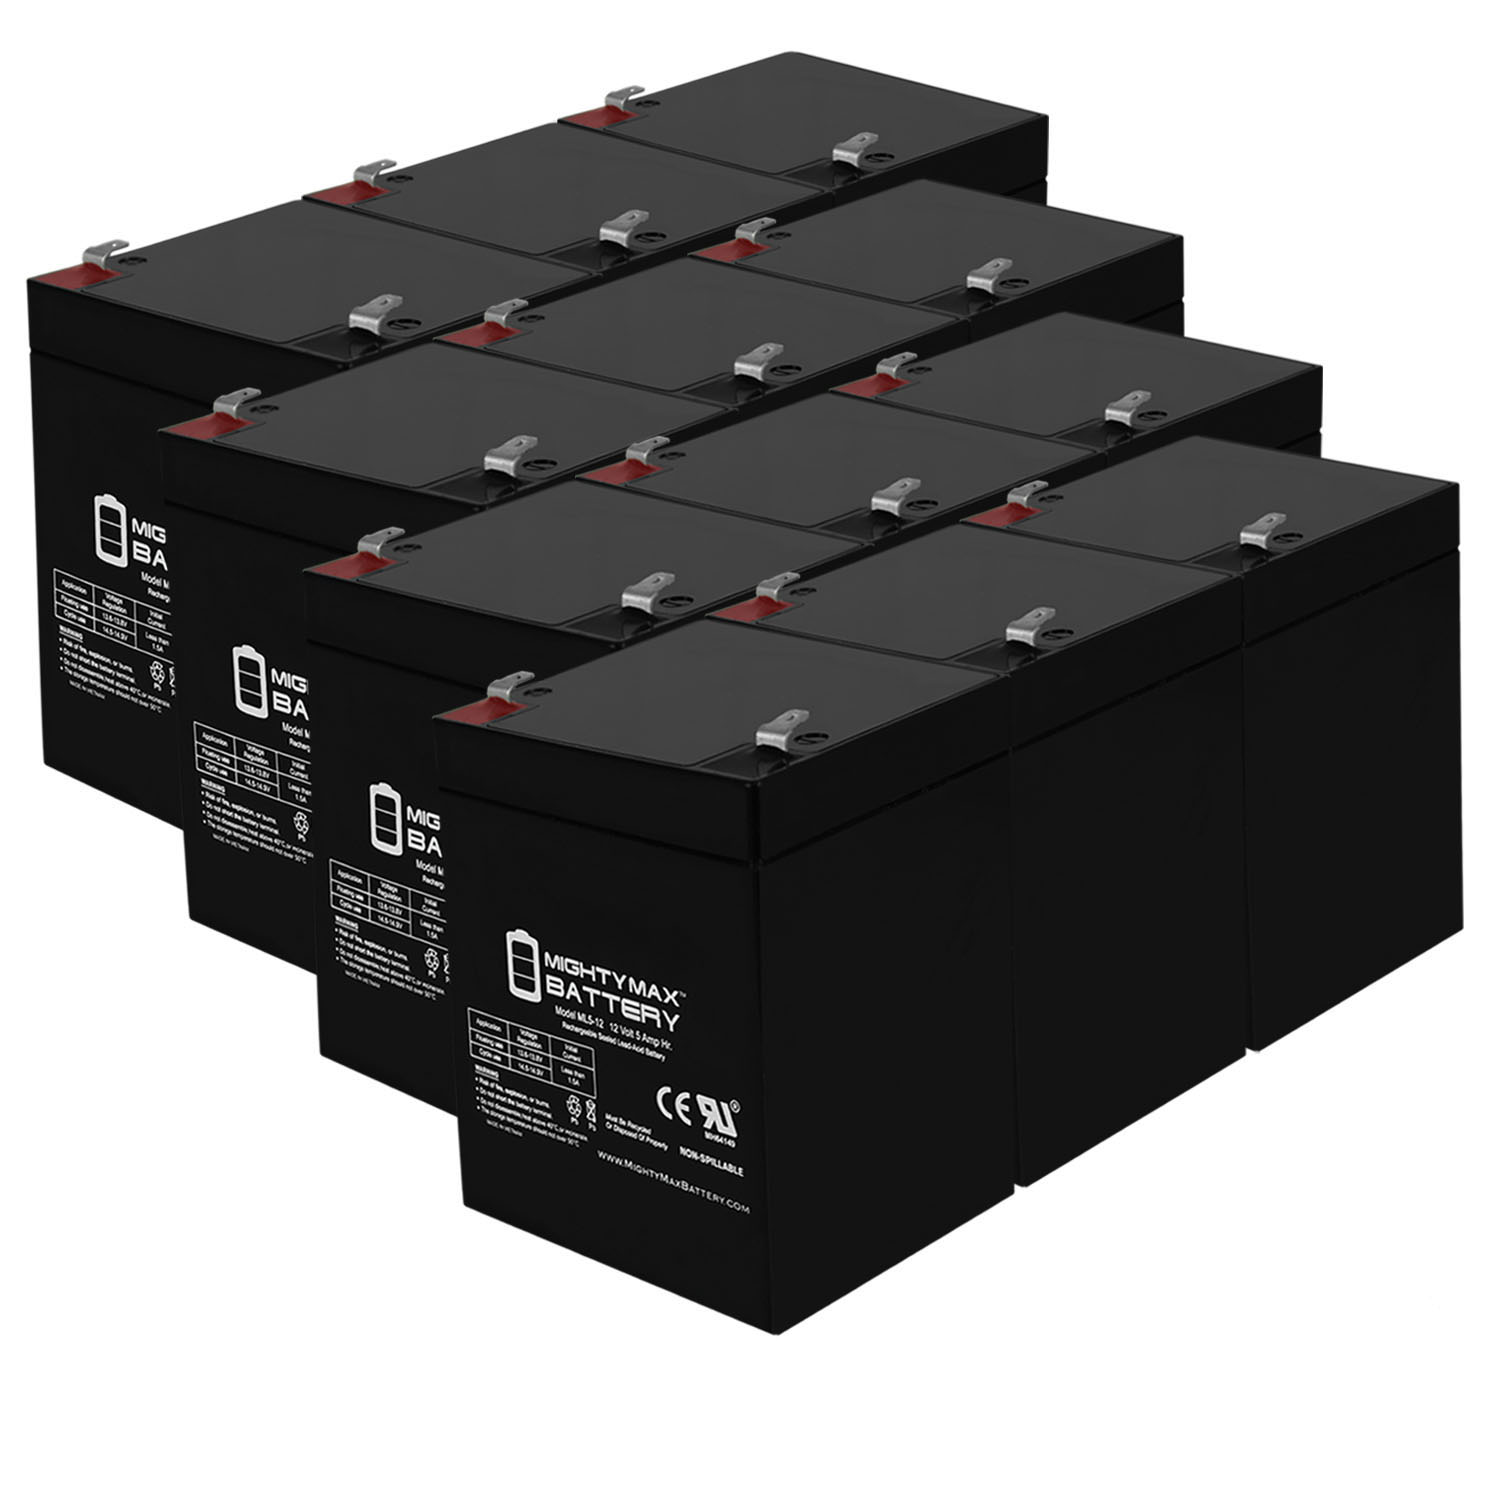 12V 5AH SLA Replacement Battery for GS Portalac PX12050 - 12 Pack